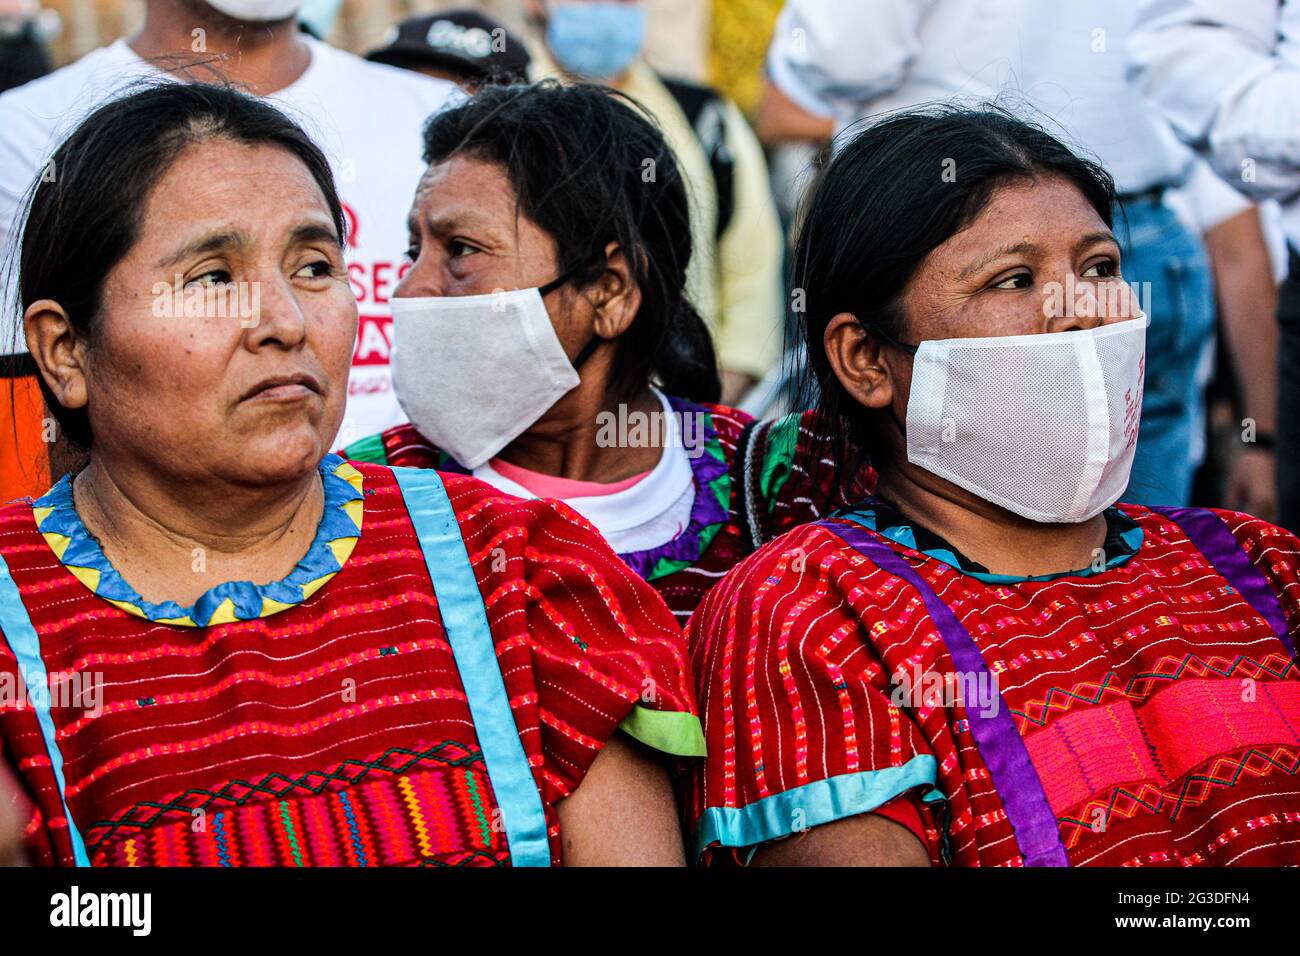 Indigenous women raramuris rarámuri, ralámuli or tarahumara indigenous community of northern Mexico, in the part of the Sierra Madre Occidental that crosses the territory of the state of Chihuahua and the southwest of the states of Durango and Sonora. Seen at a political rally in the Miguel Aleman town, during the political campaigns by the government of Sonora in the electoral process 221 (Photo by Luis Gutierrez / Norte Photo) Mujeres indigenas raramuris rarámuri, ralámuli o tarahumaras comunidad indígena del norte de México, en la parte de la Sierra Madre Occidental que atraviesa territori Stock Photo